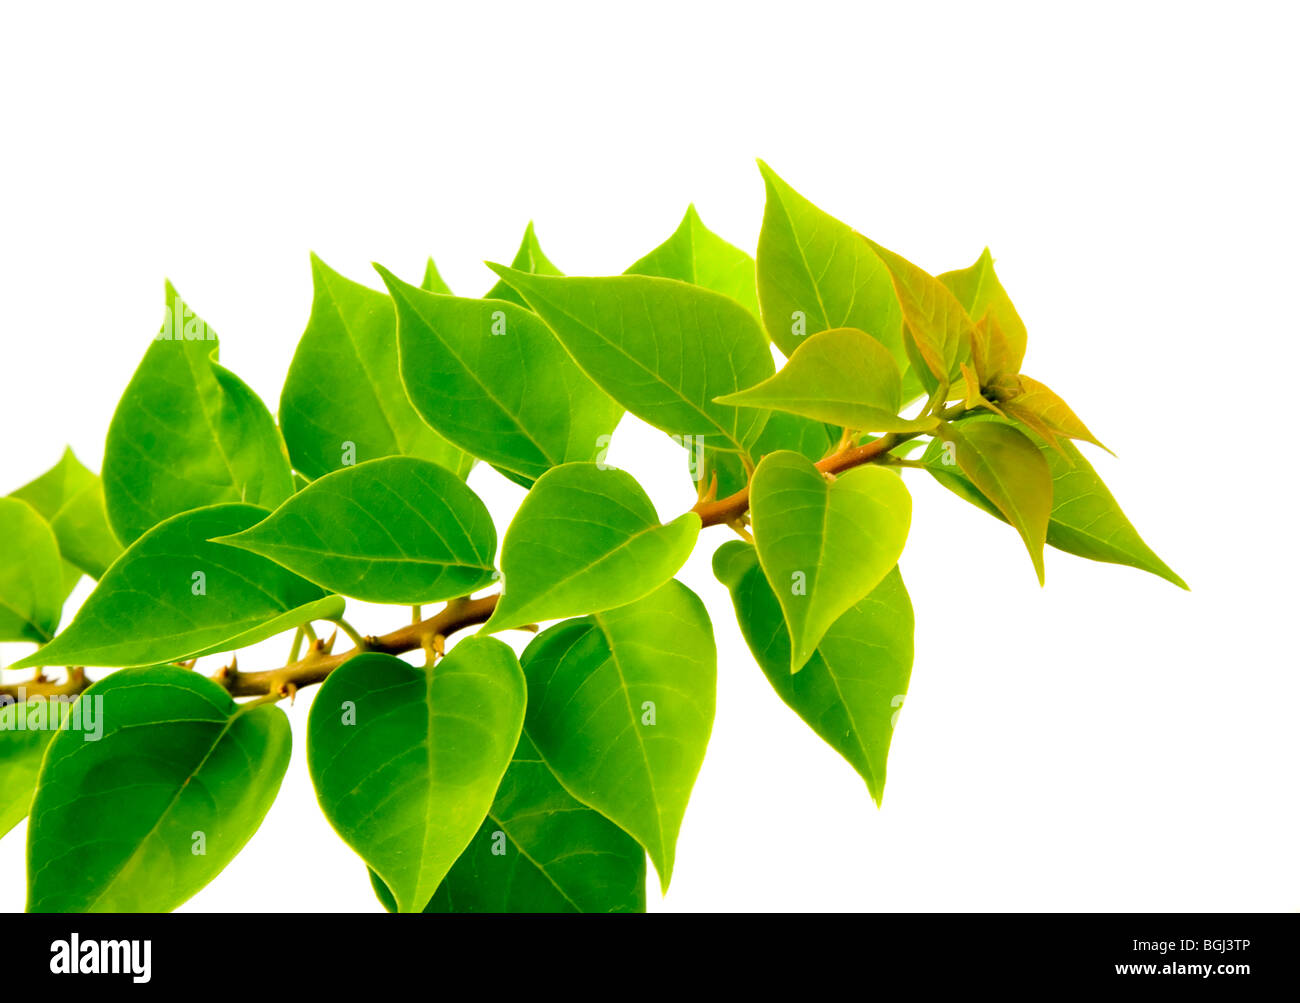 Branch of green leaves isolated on white background Stock Photo